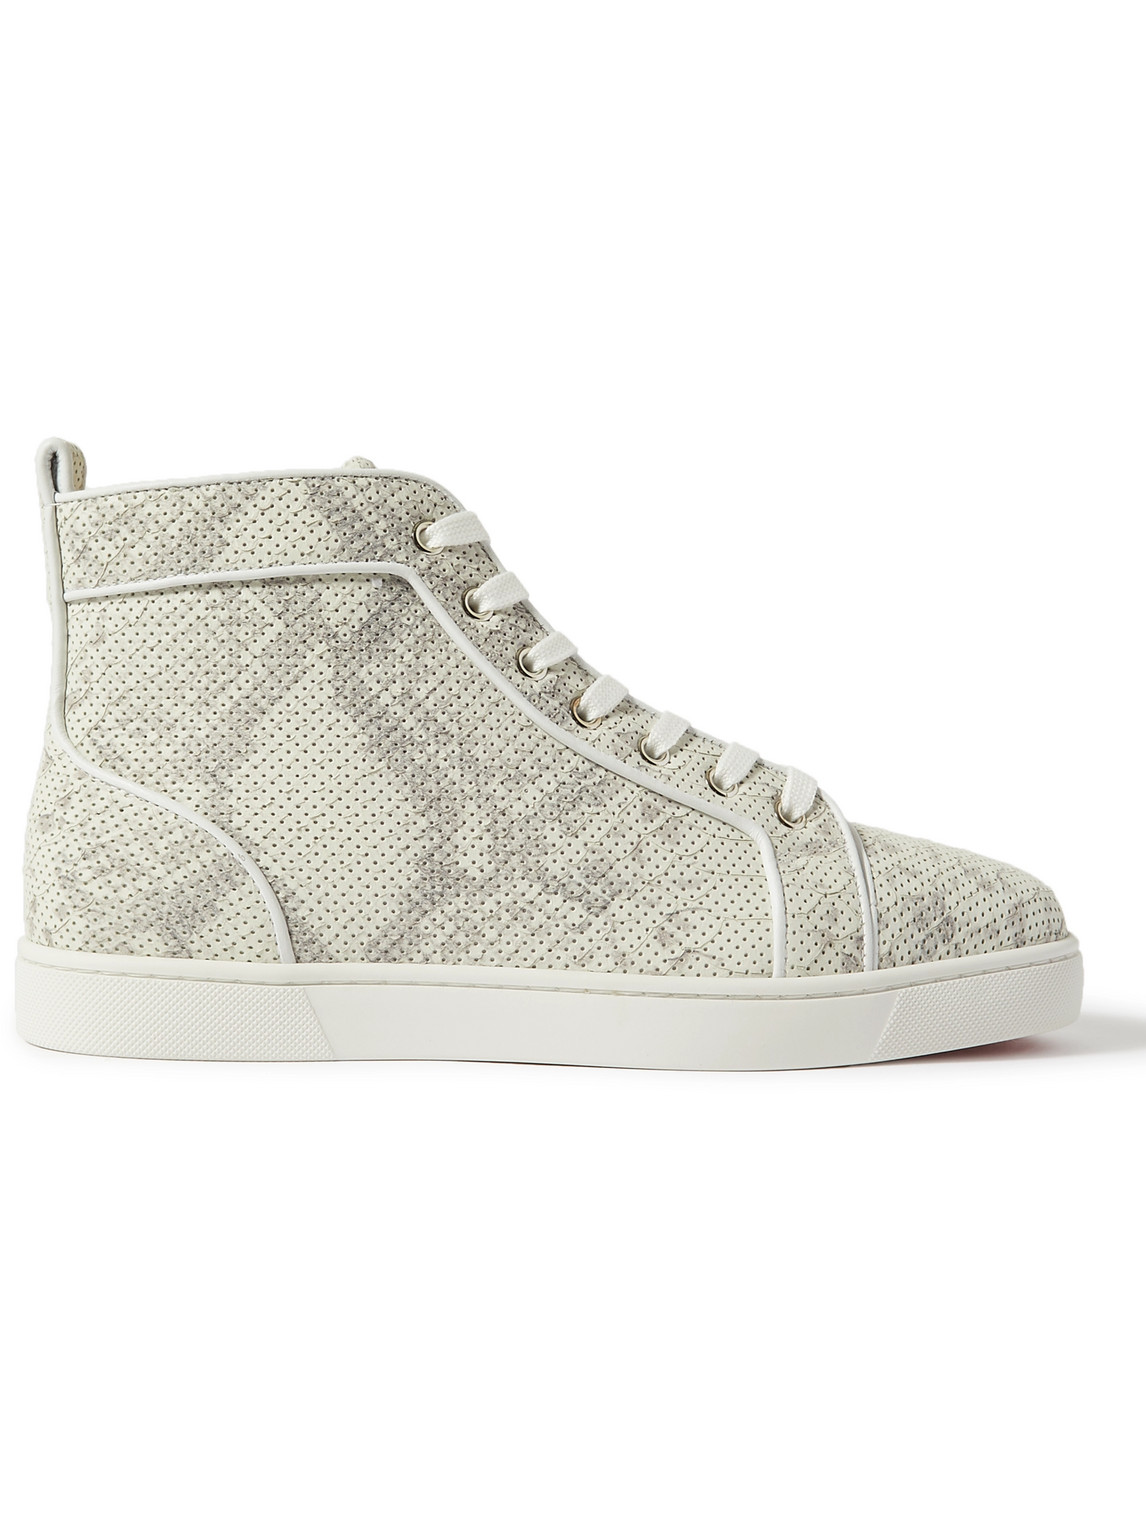 Louis Perforated Snake-Effect Leather High-Top Sneakers